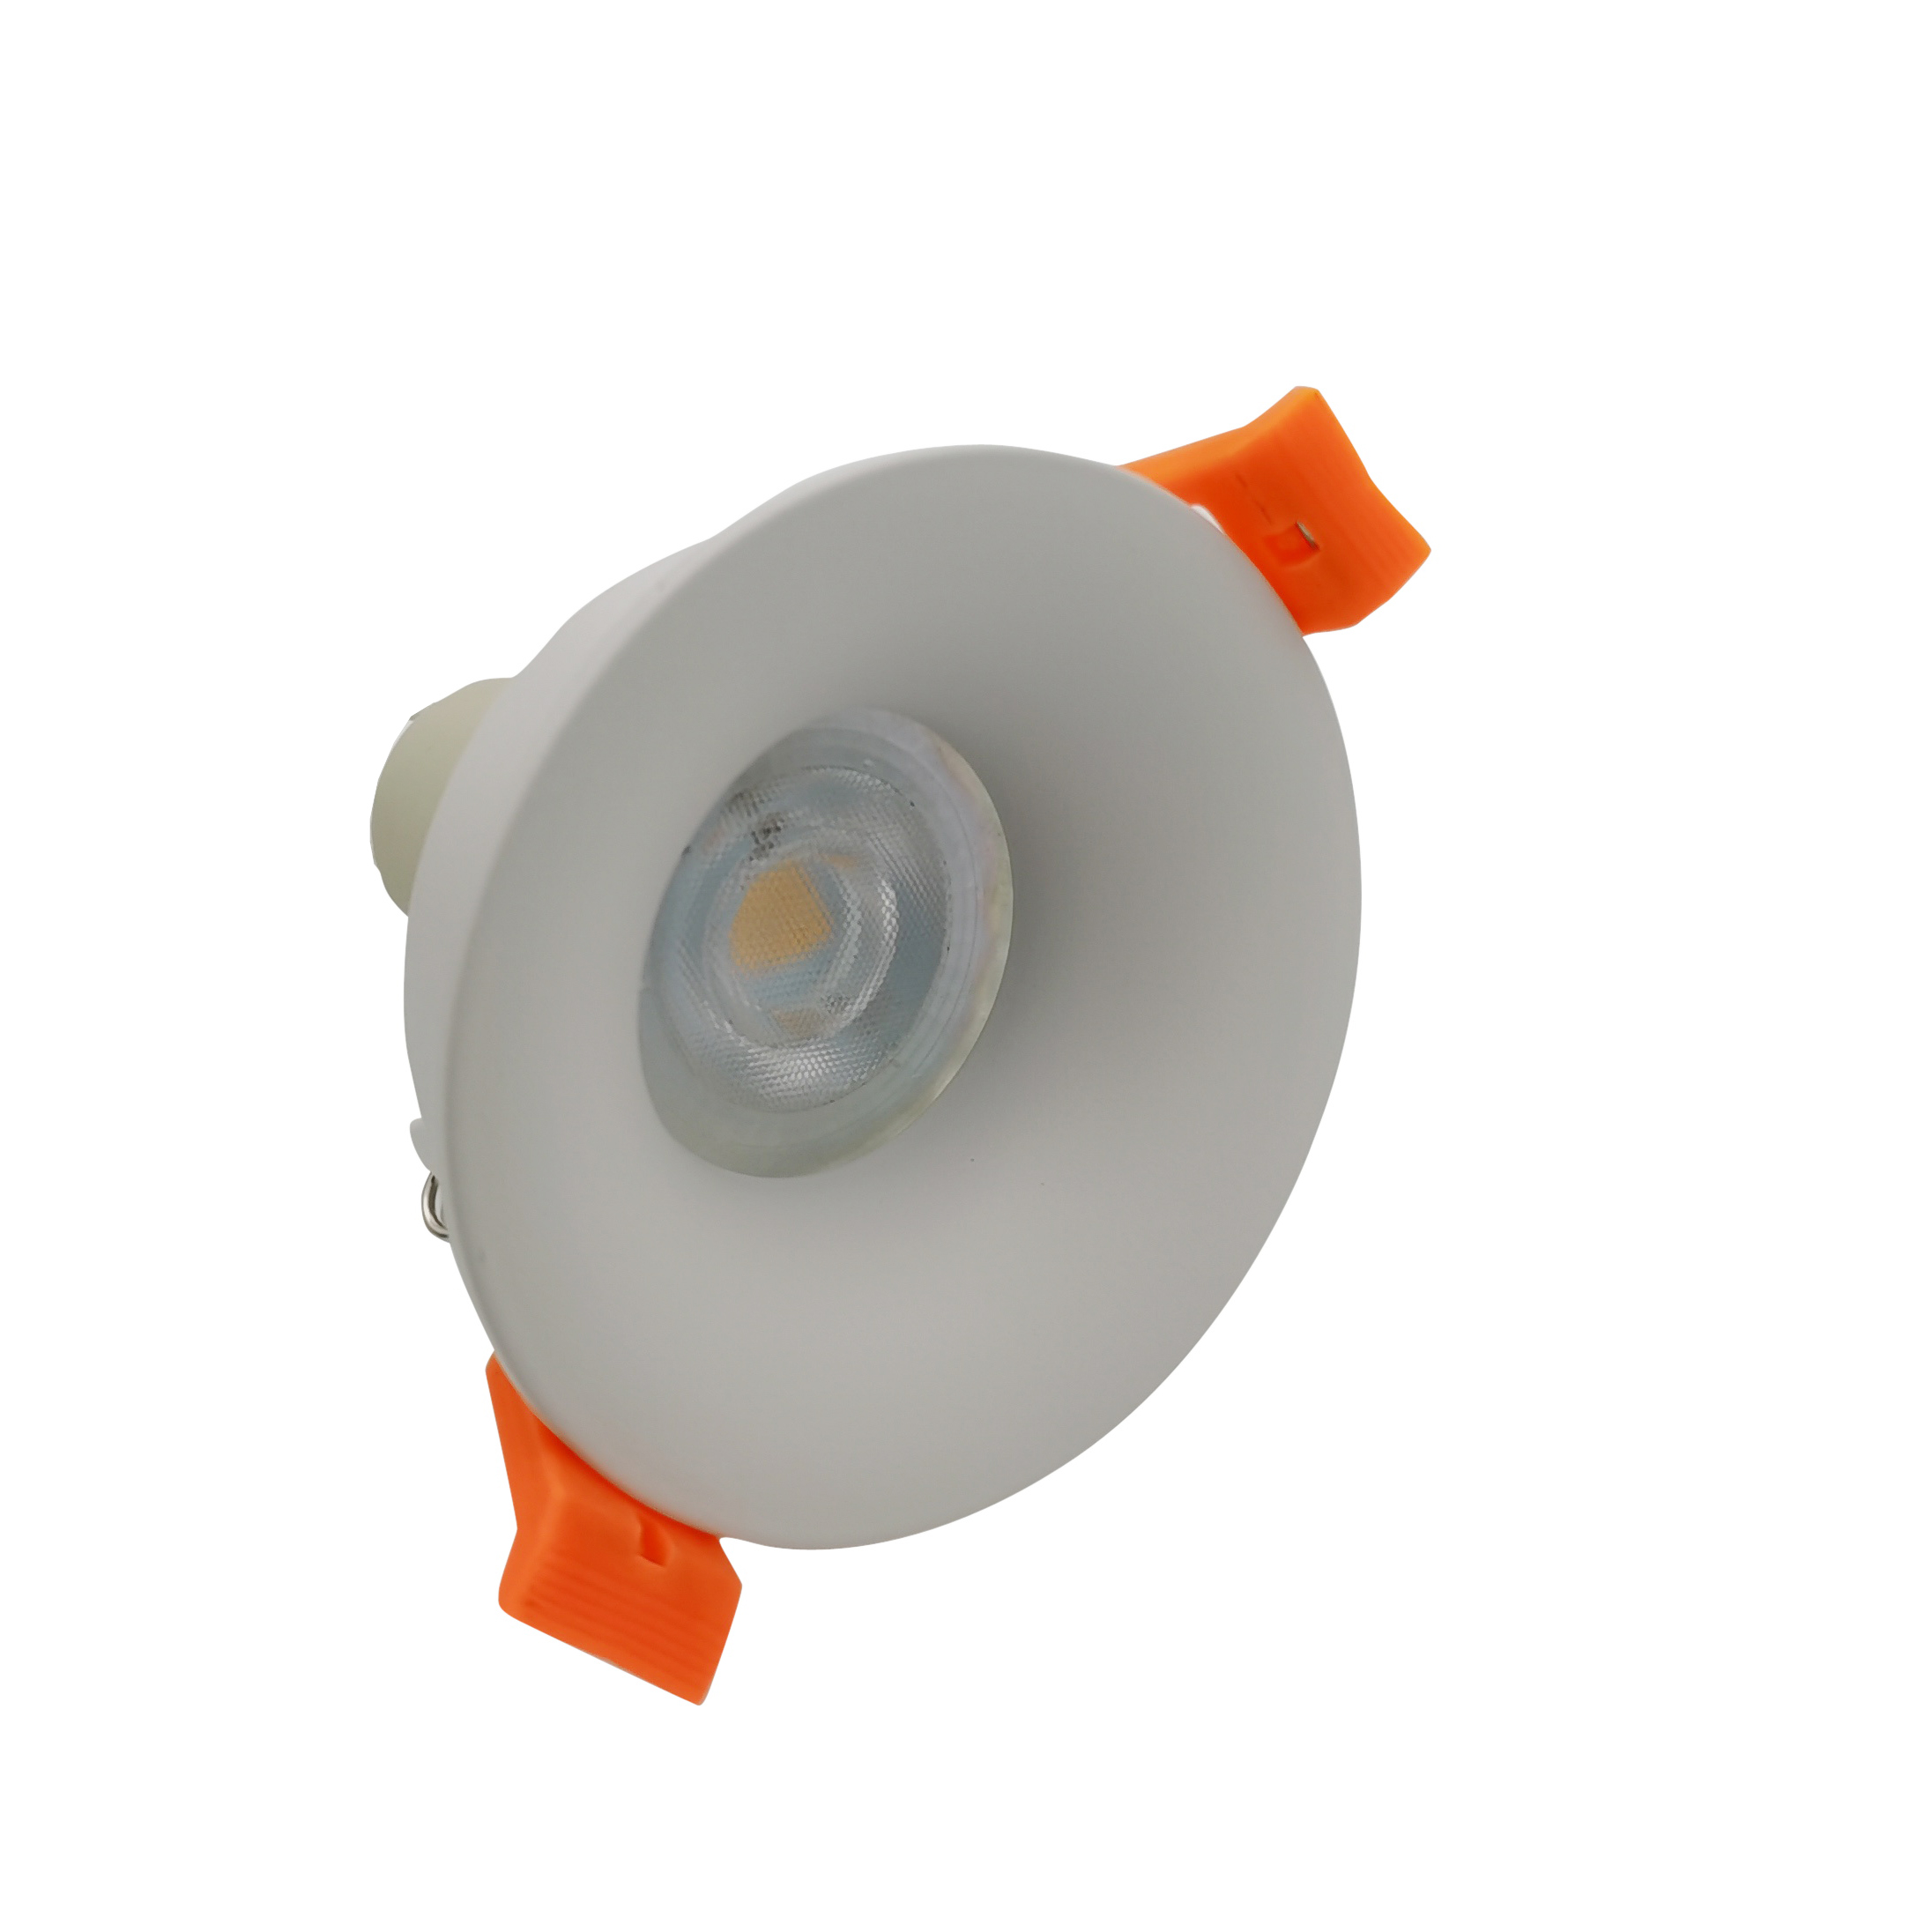 Outcut 75mm White and Black Non-Adjustable Round GU 10 Downlight